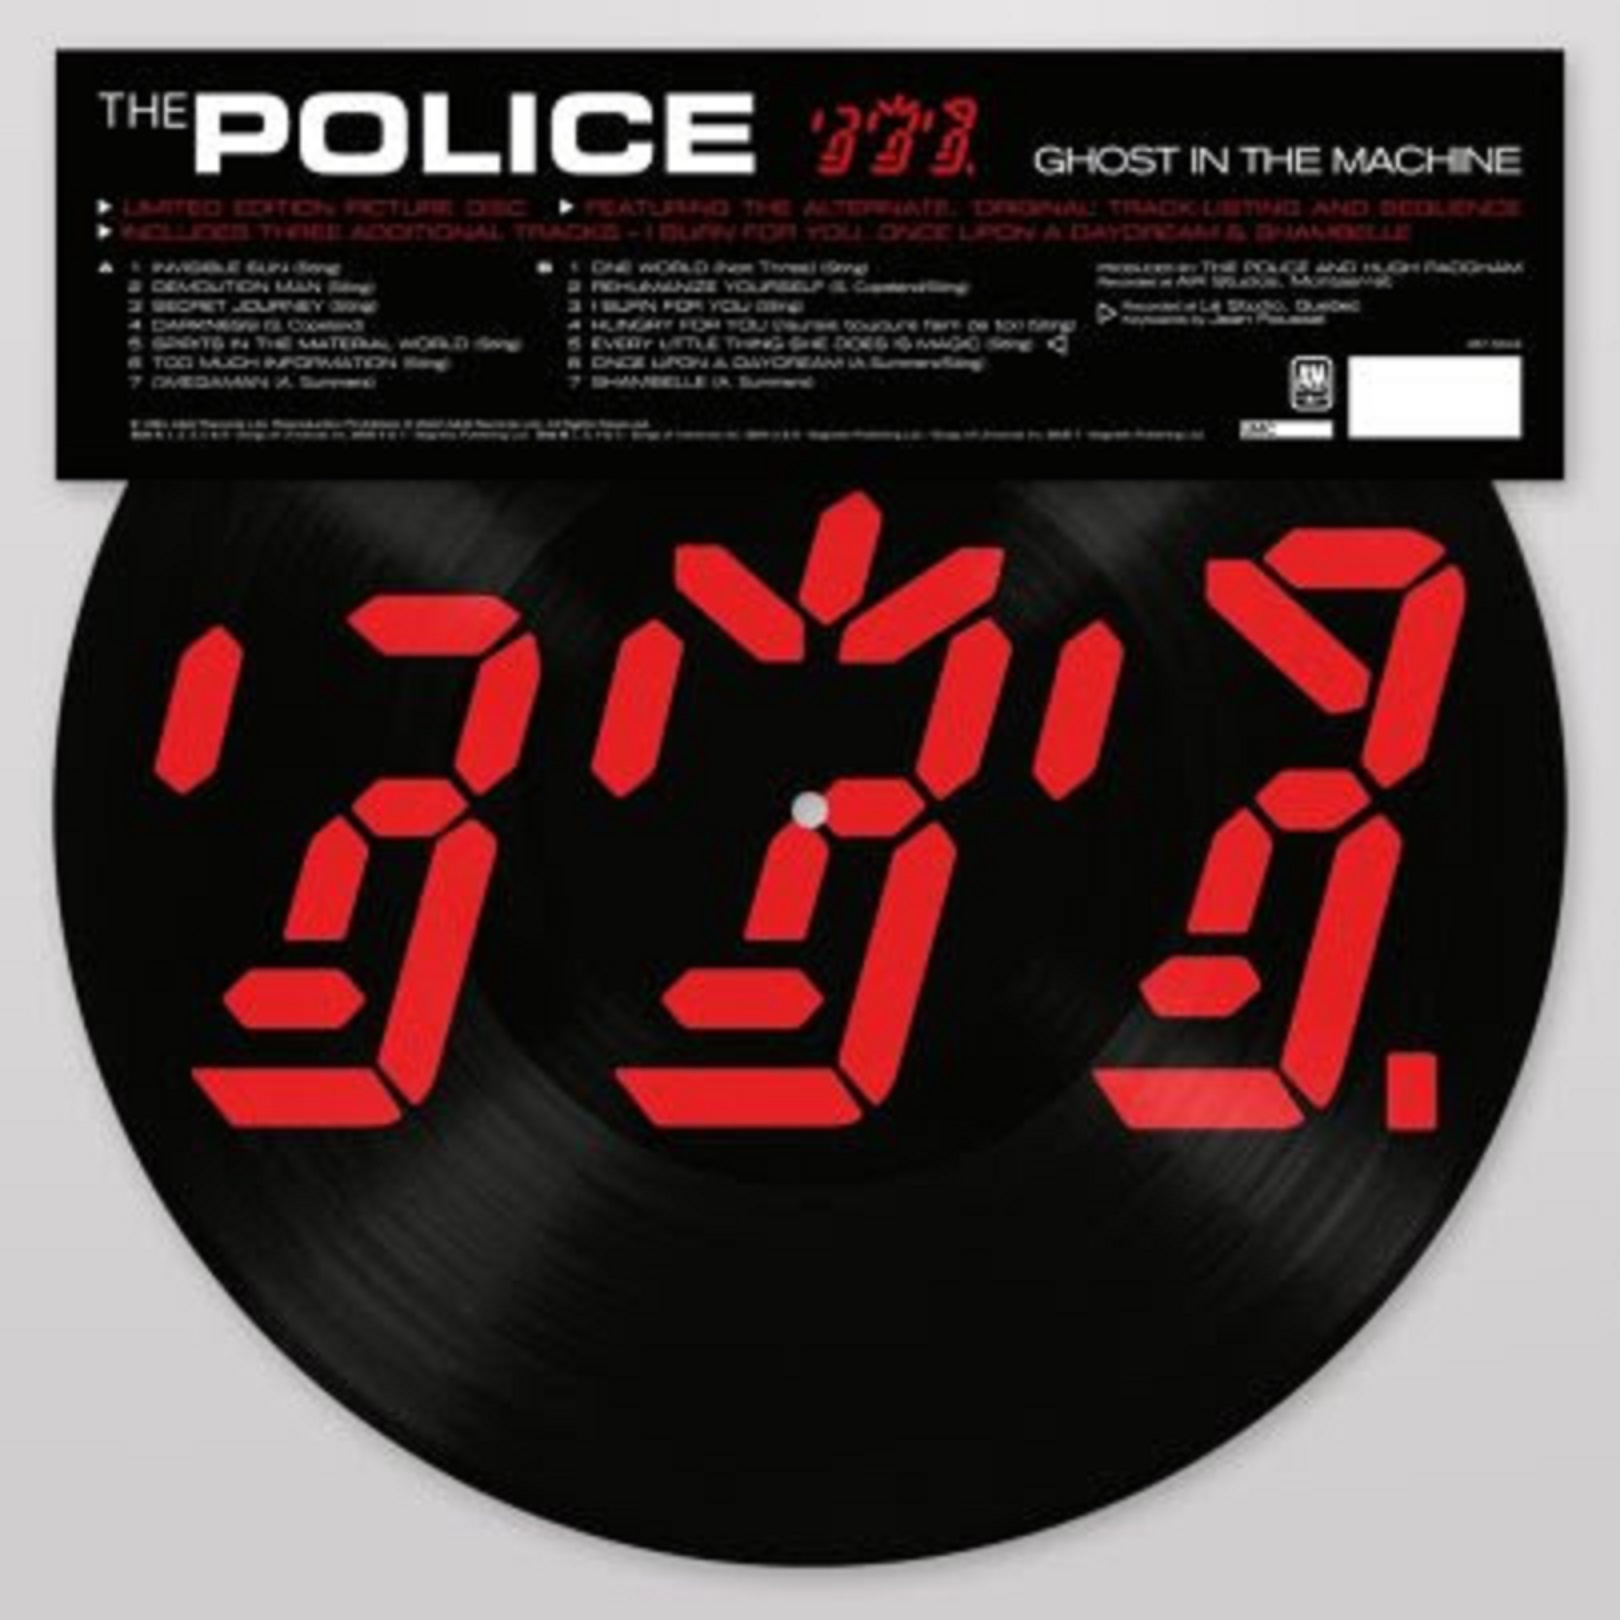 The Police 'Ghost In The Machine' Limited Edition Picture Disc LP Containing ‘Original’ Tracklisting - To be Released November 4